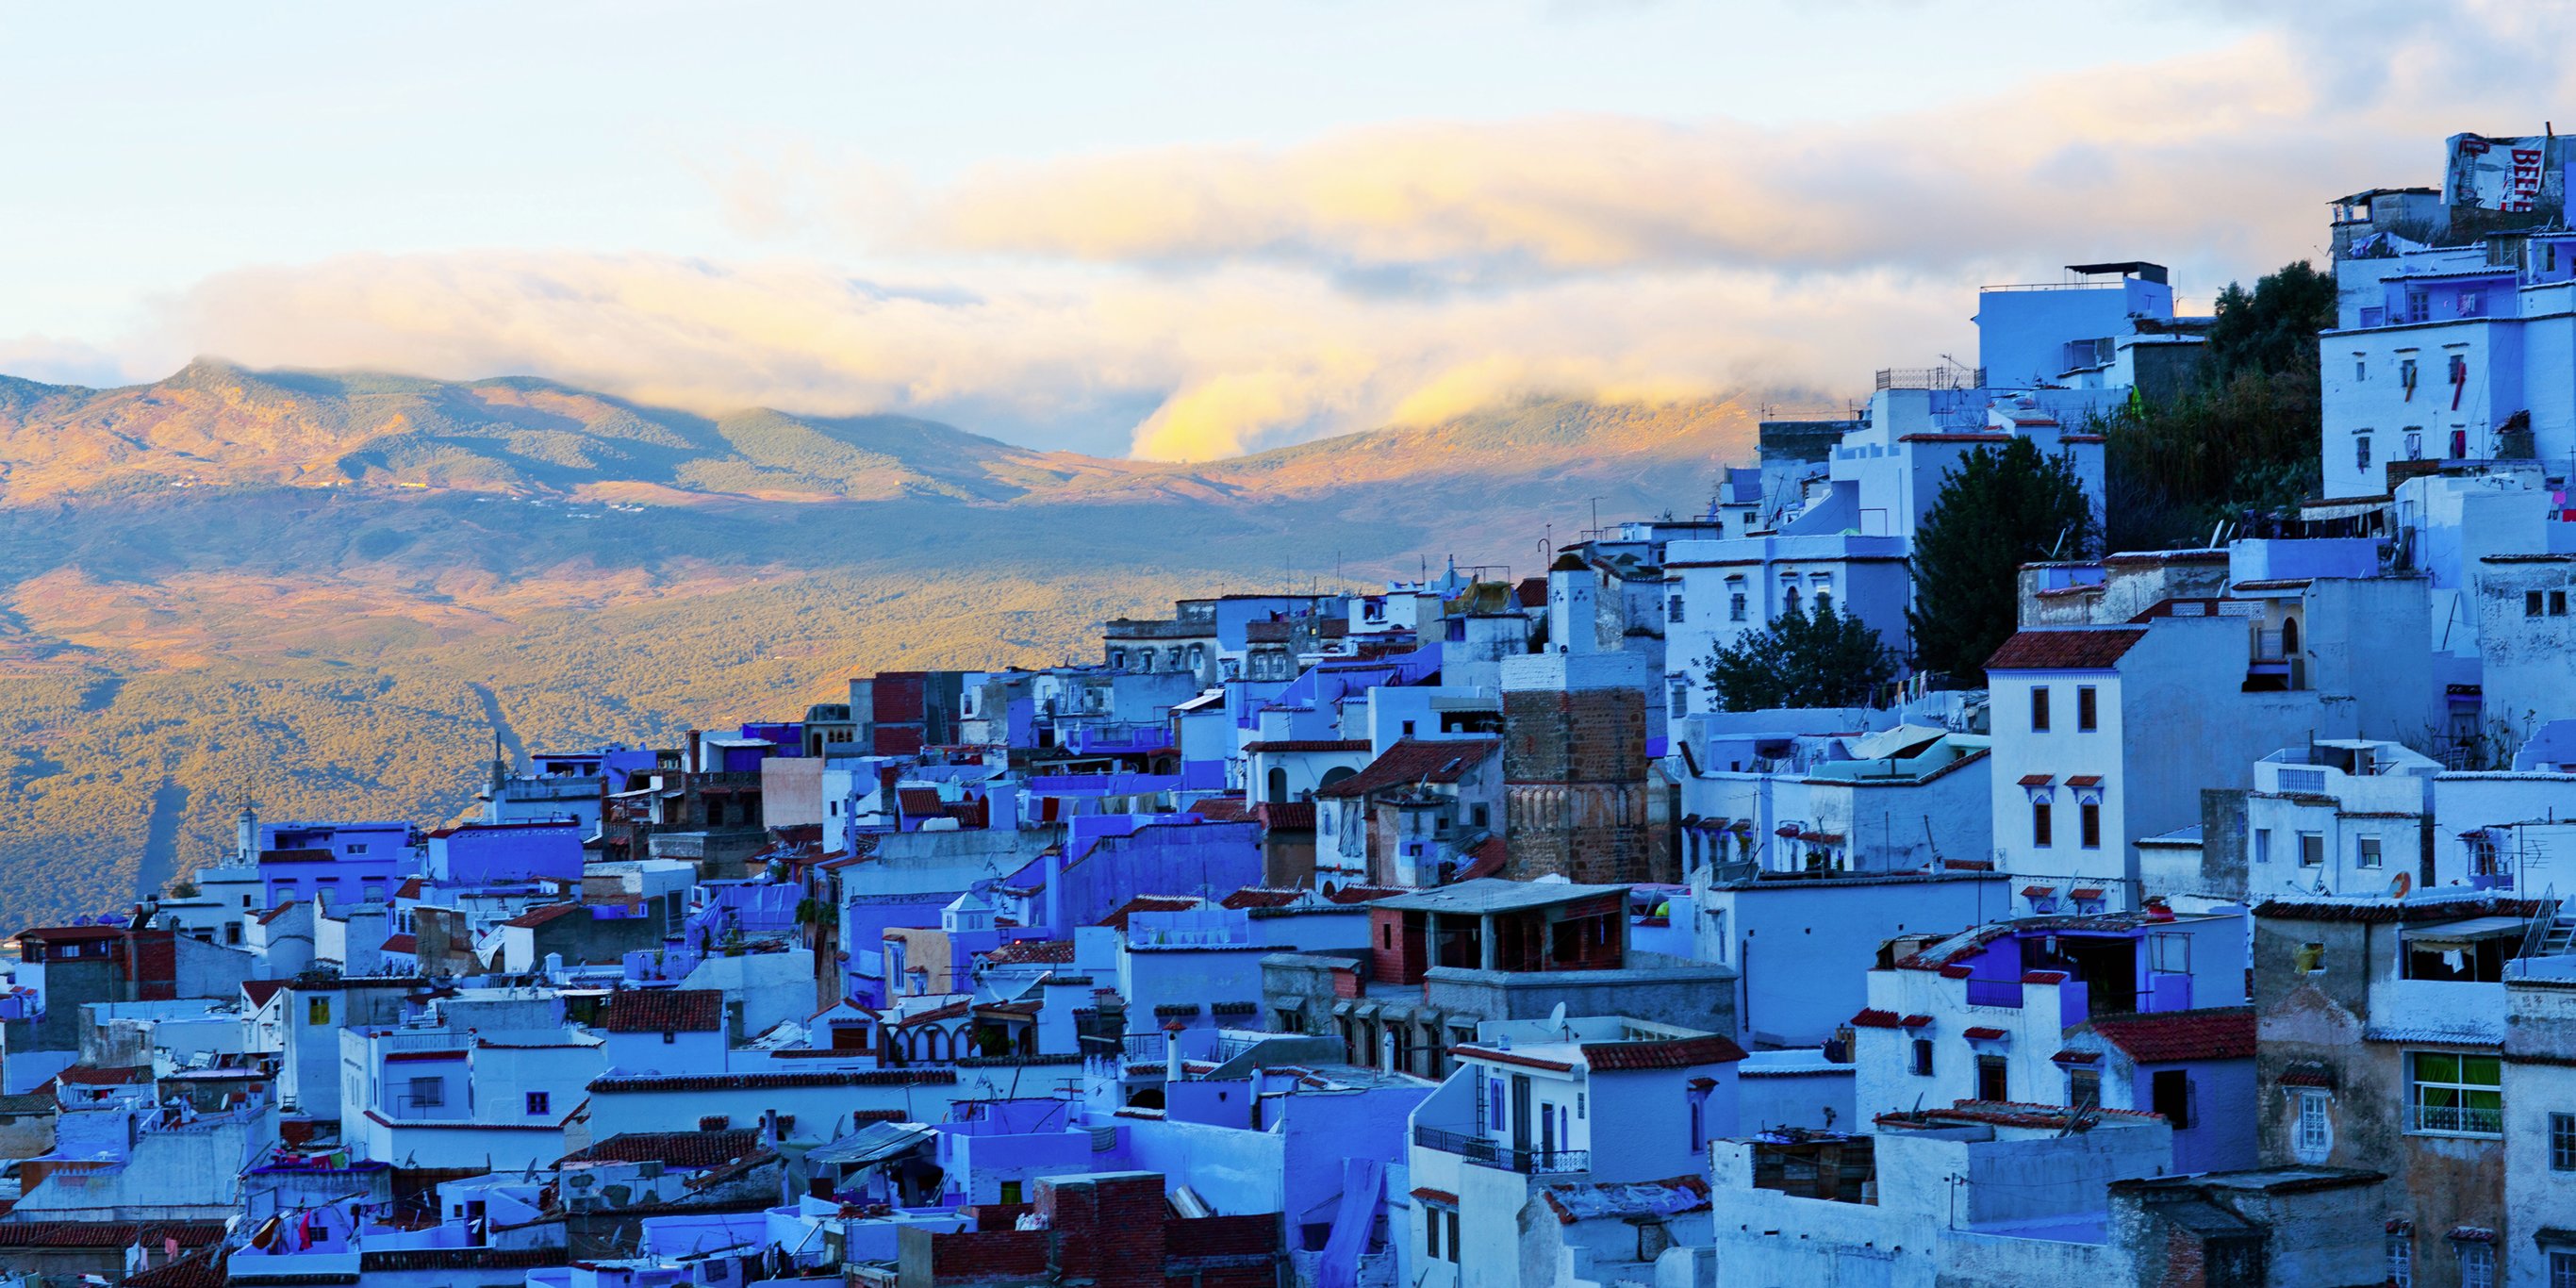 The City of Chefchaouen in Morocco is painted blue - INSIDER